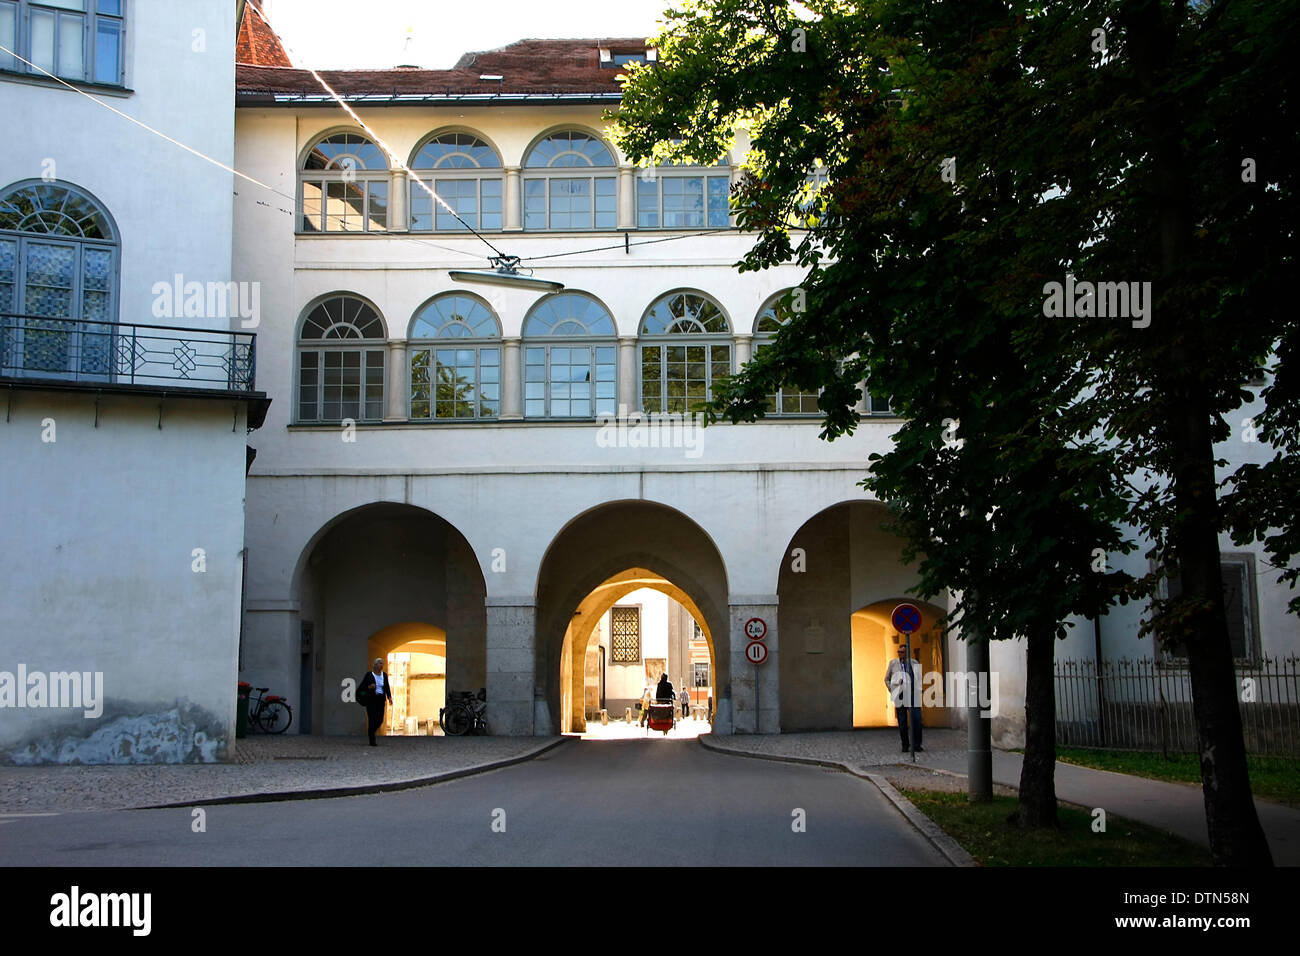 The castle gate is located at the interface between Hofgasse and Erzherzog Johann Allee. It is in the district Inner City of Graz and is part of the Graz city crown. Photo: Klaus Nowottnick Date: June 26, 2013 Stock Photo